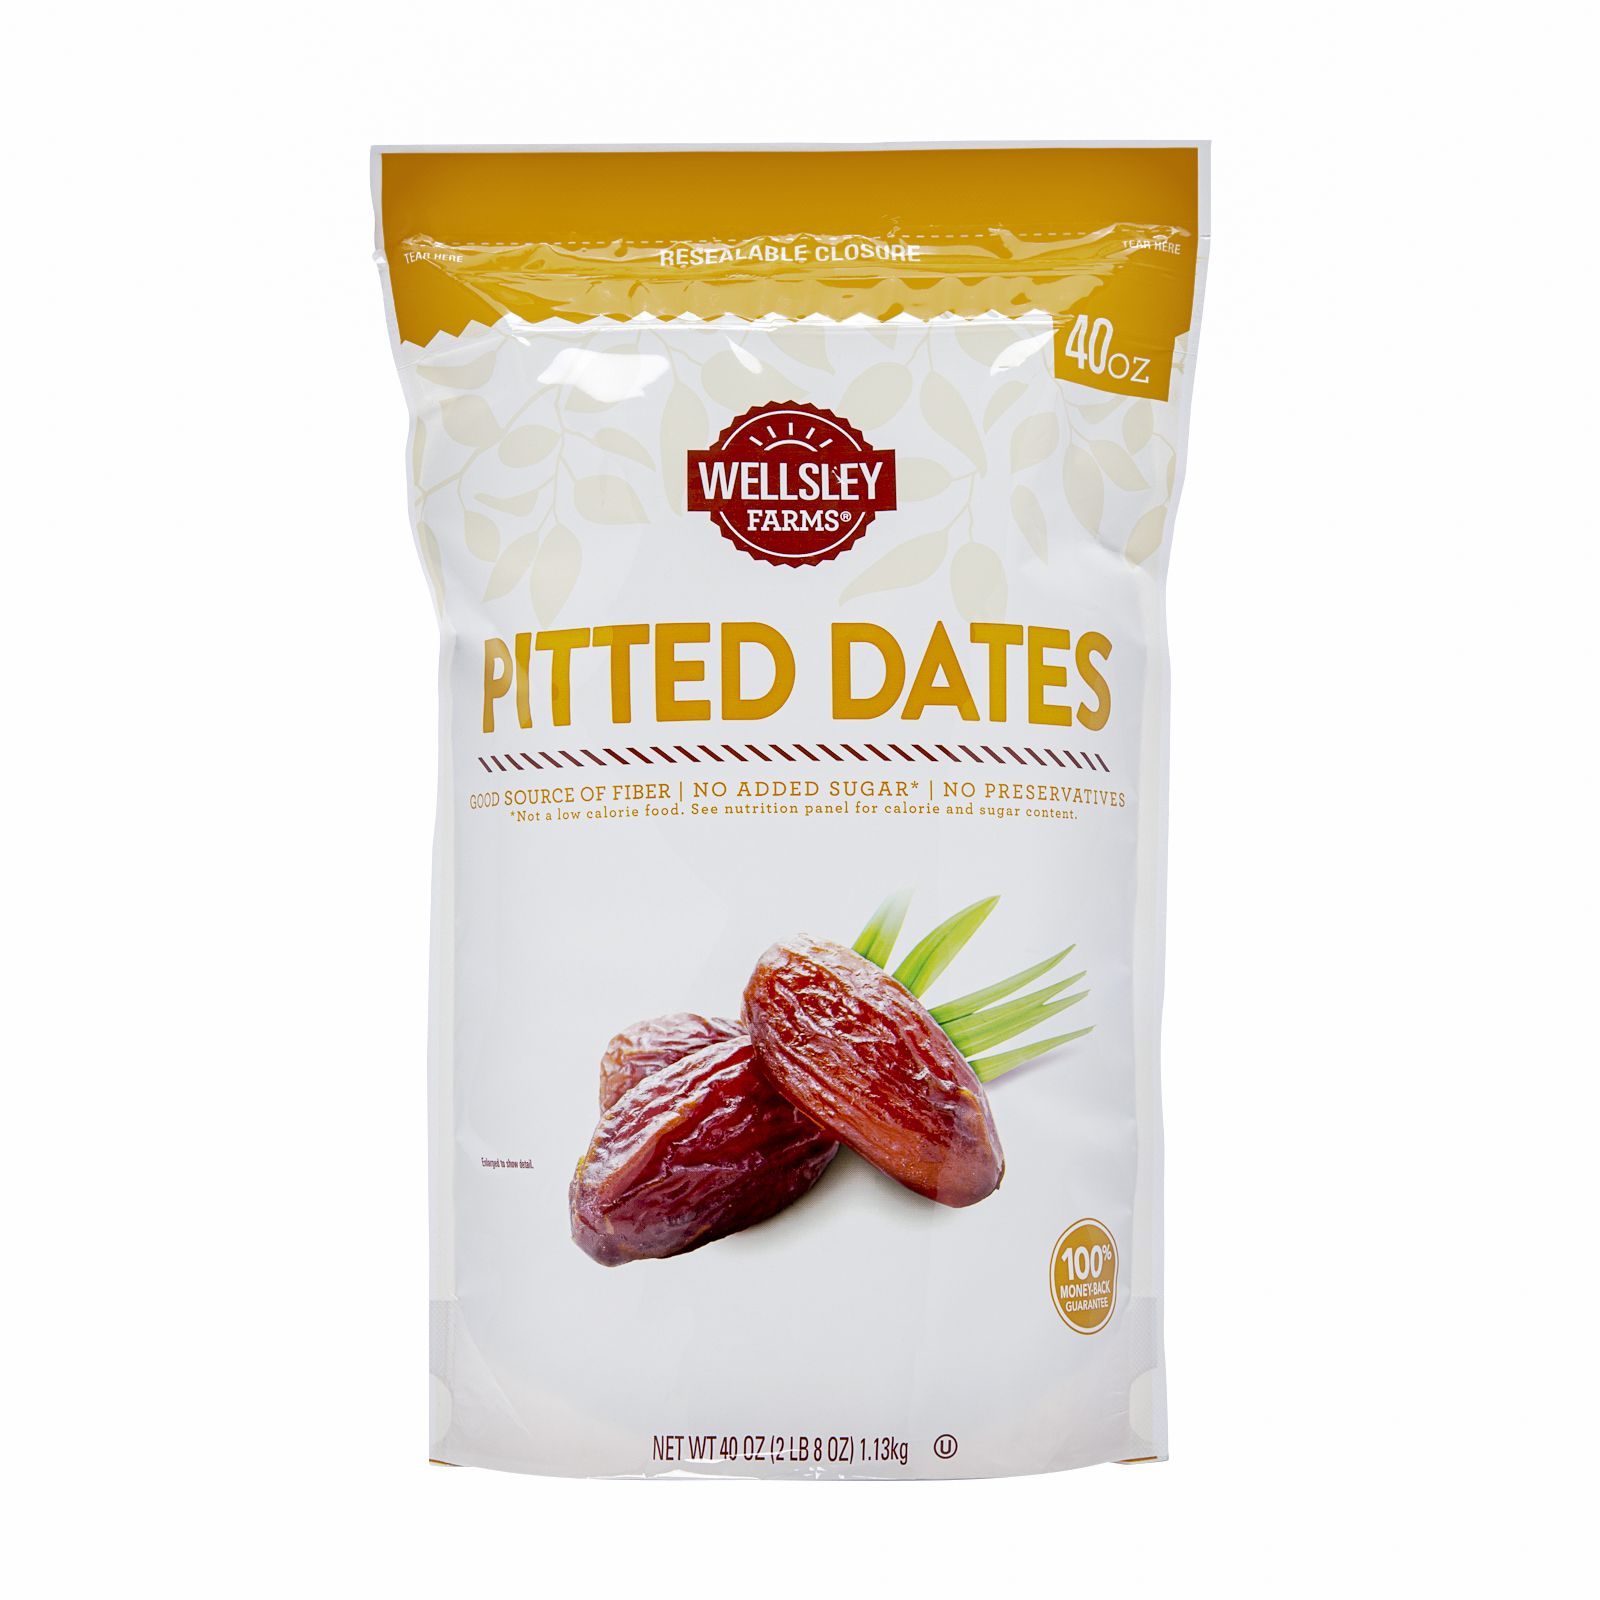 Dates: pitted and with no added sugar